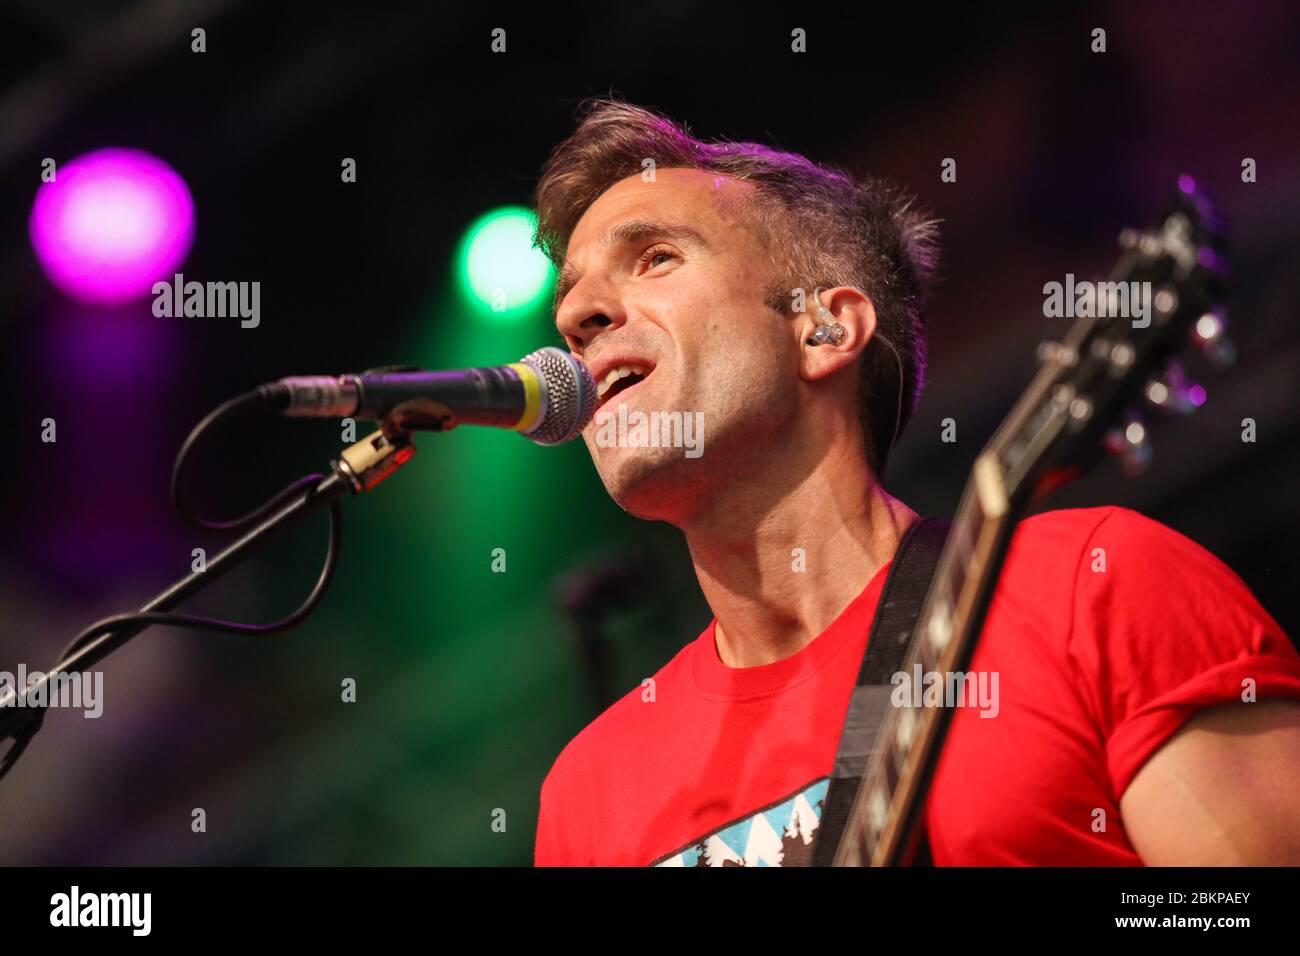 Singer Irwin Sparkes of The Hoosiers, as the band performs at Llangollen International Musical Eisteddfod in Wales. Stock Photo